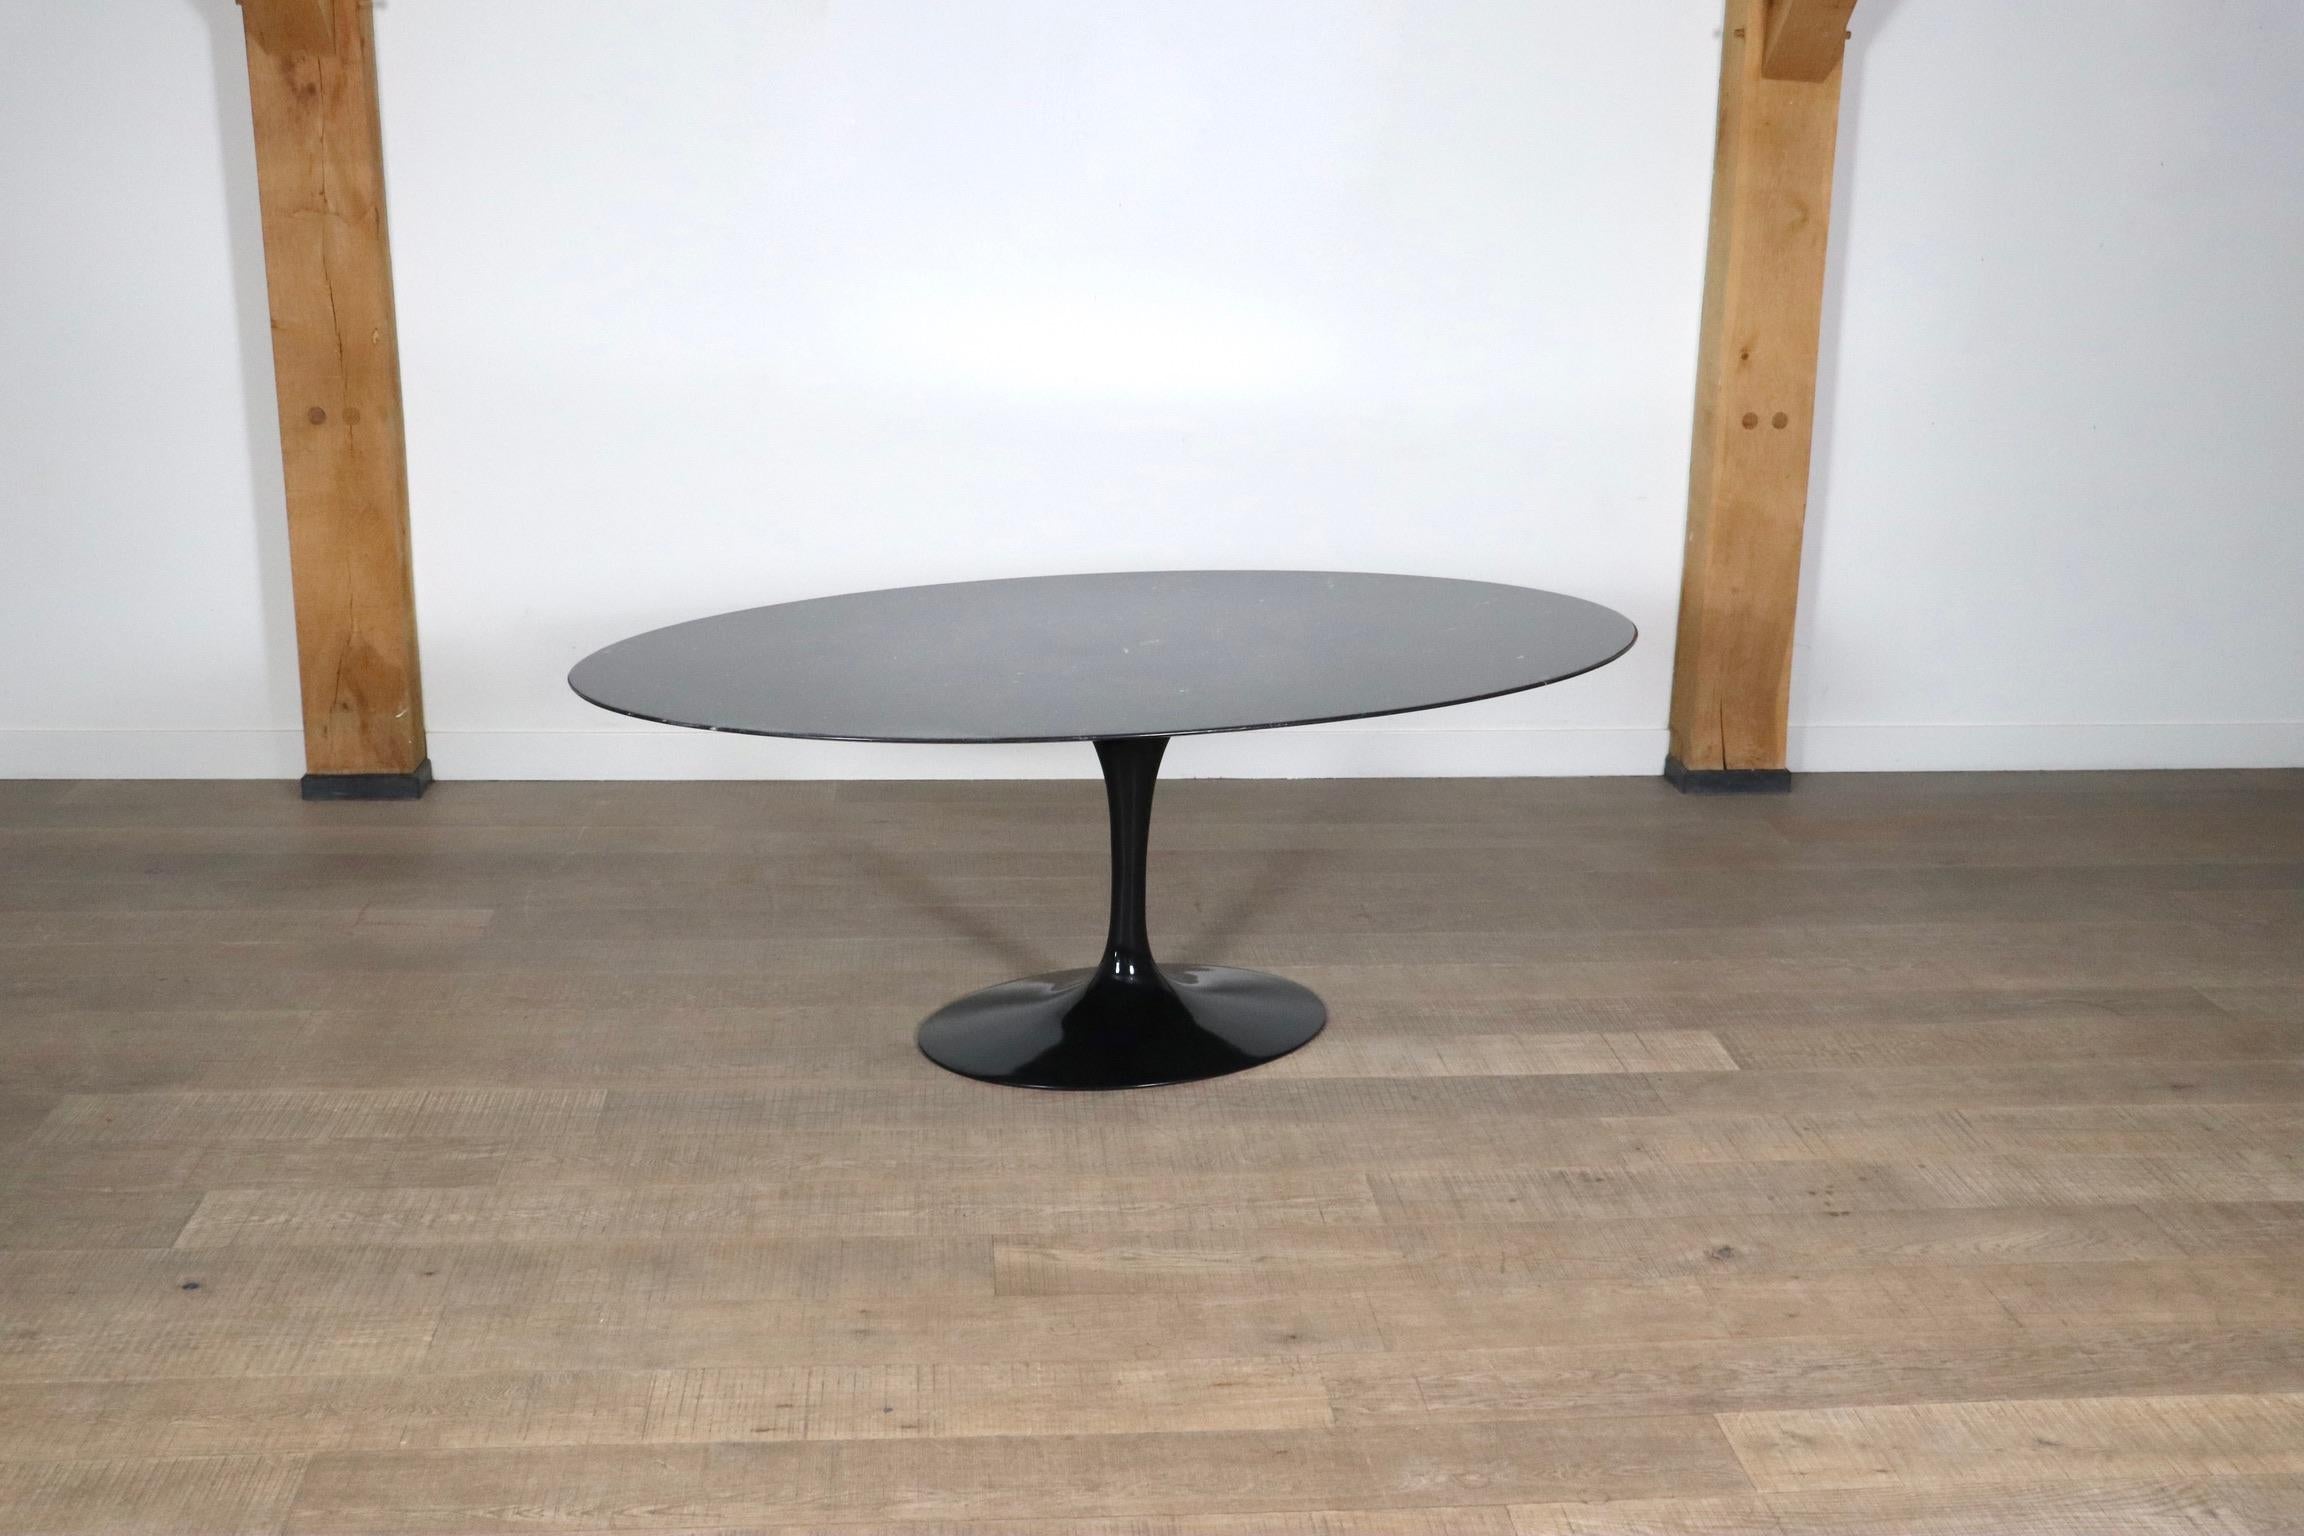 Nice oval shaped vintage black on black marble tulip dining table, designed by Eero Saarinen for Knoll International. This timeless design will instantly elevate any dining area with its luxurious looks and feeling. The beautiful calm grains of the